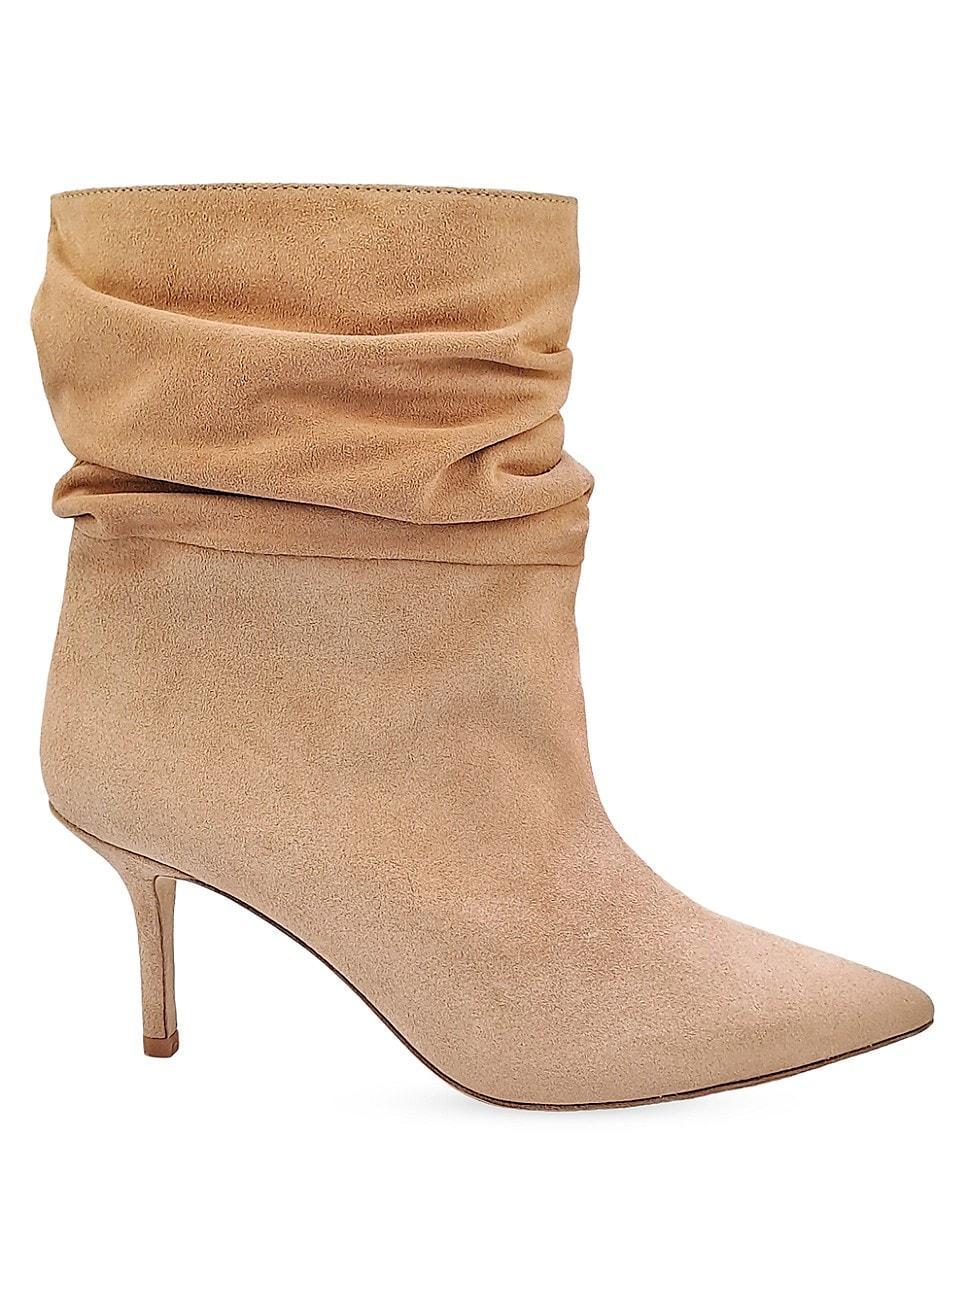 Florine 70MM Suede Booties Product Image